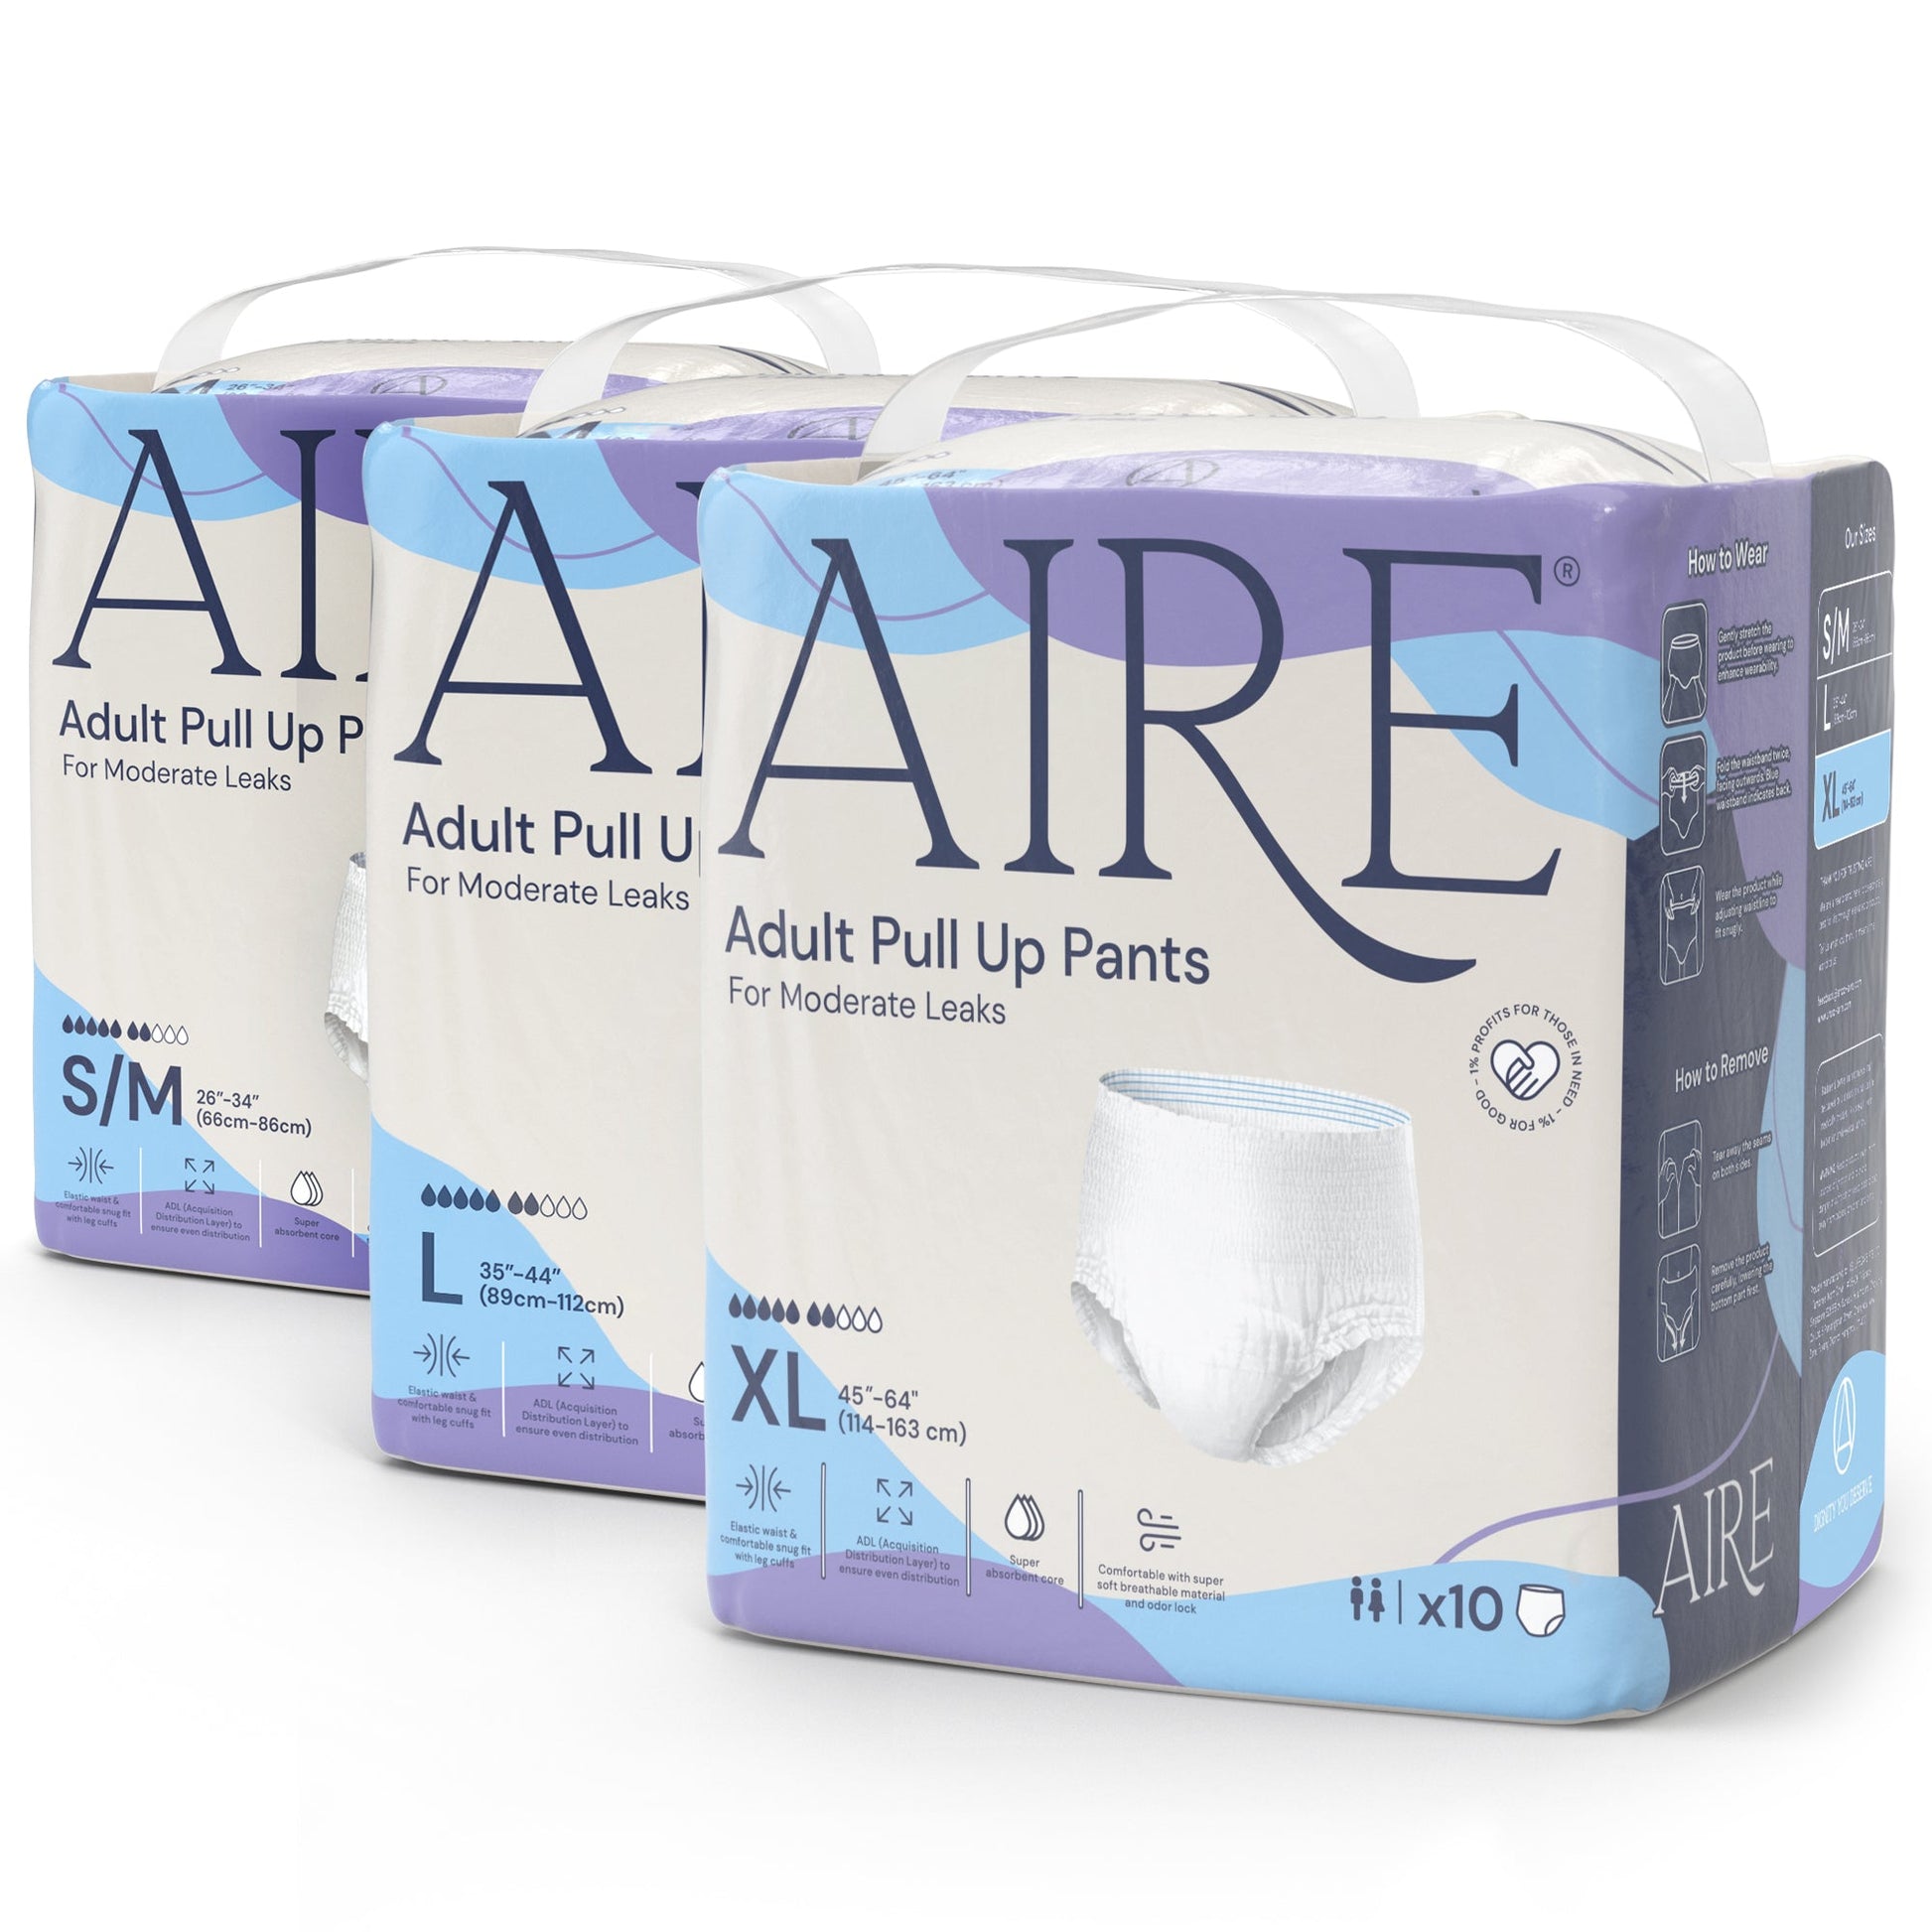 Aire Adult Diaper Pull Up Pants - Size XL (1X10 pcs) (Adult Diaper Pants, Highly Absorbent, Snug, Breathable)